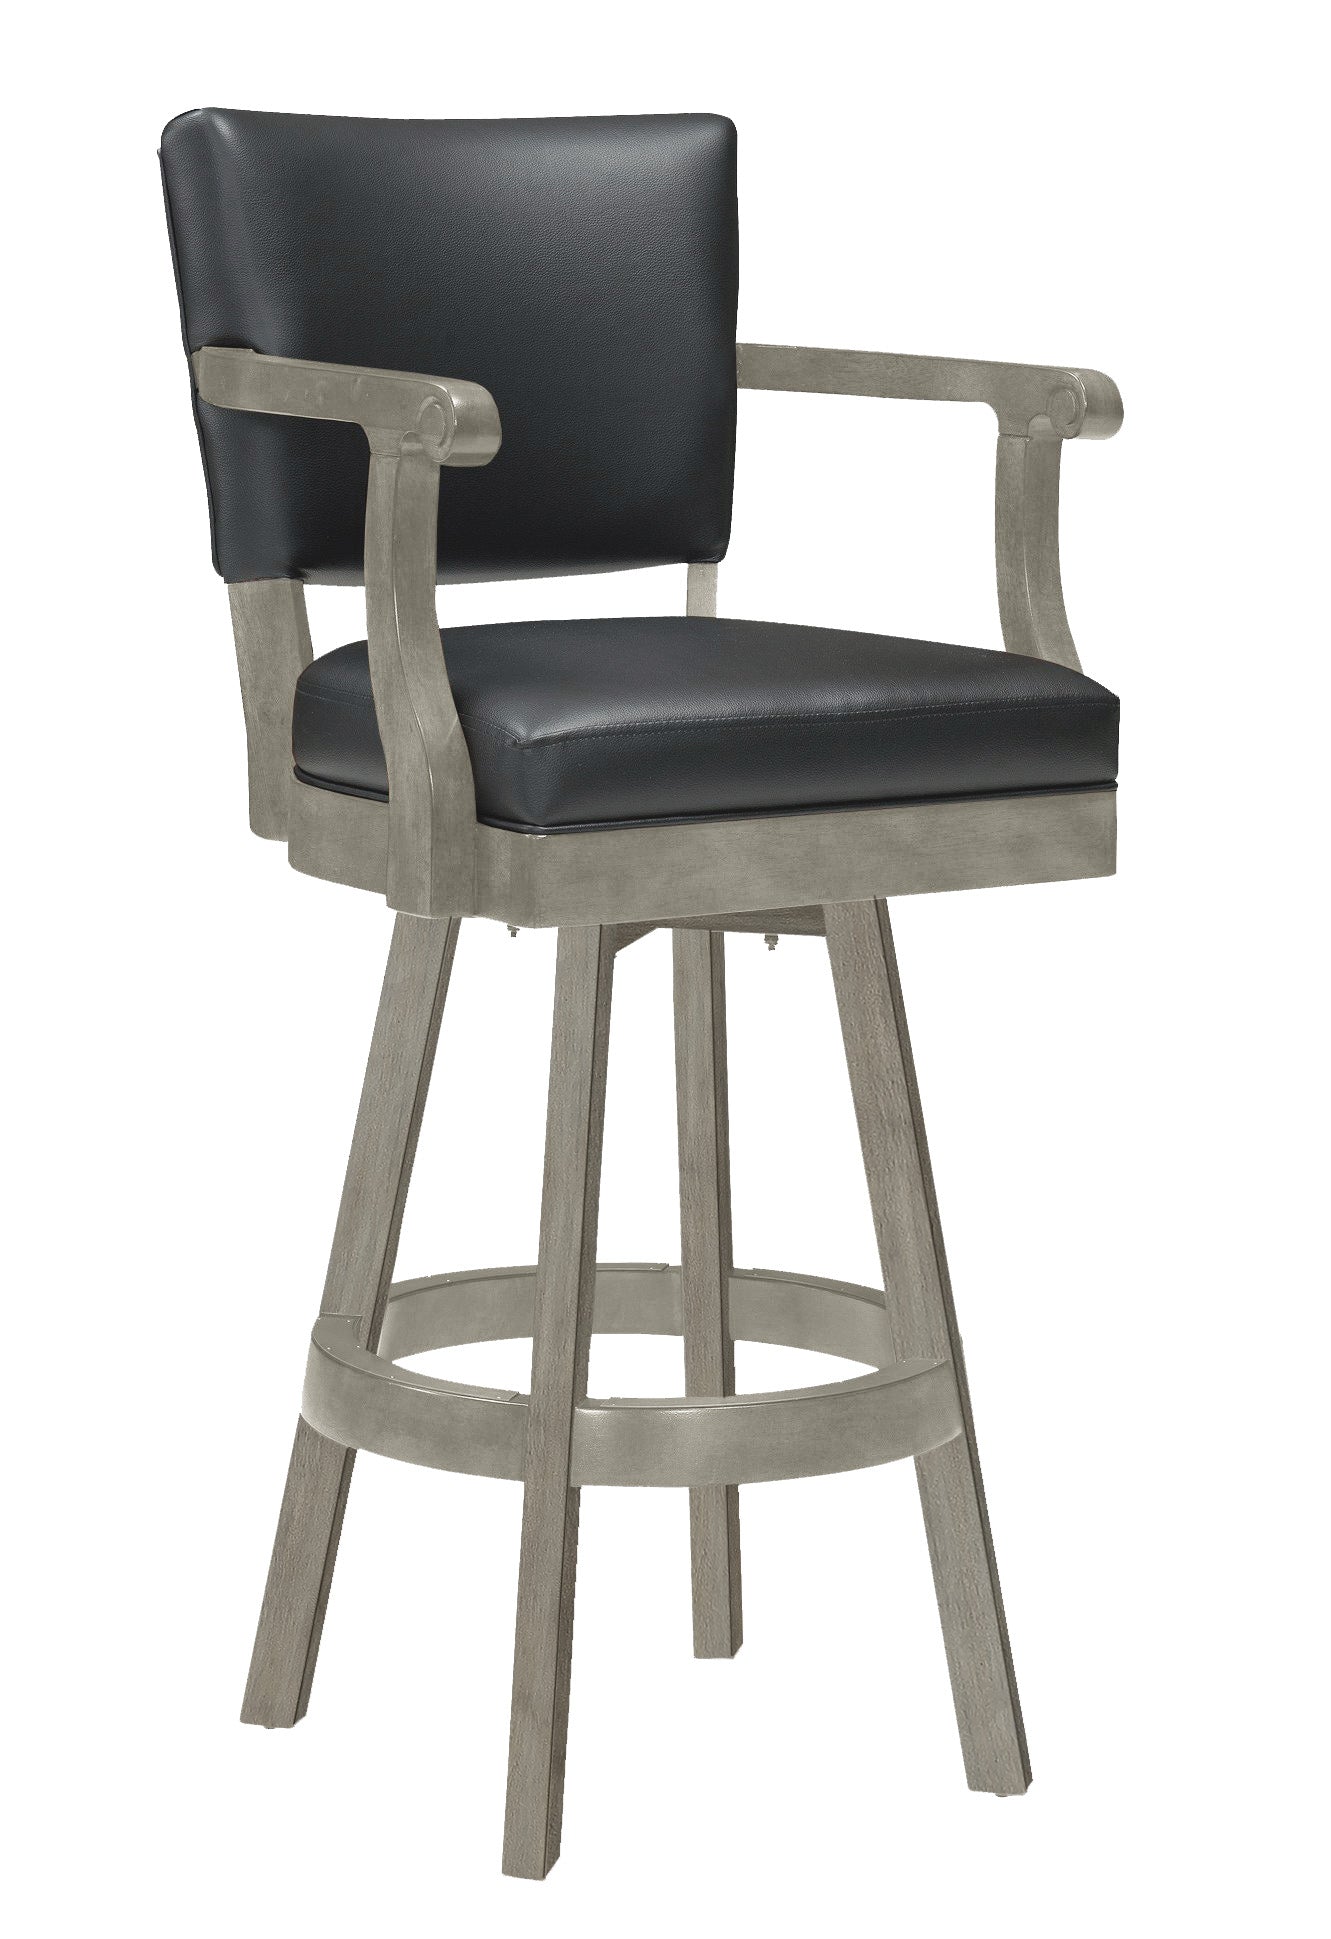 Legacy Billiards Classic Backed Barstool in Overcast Finish